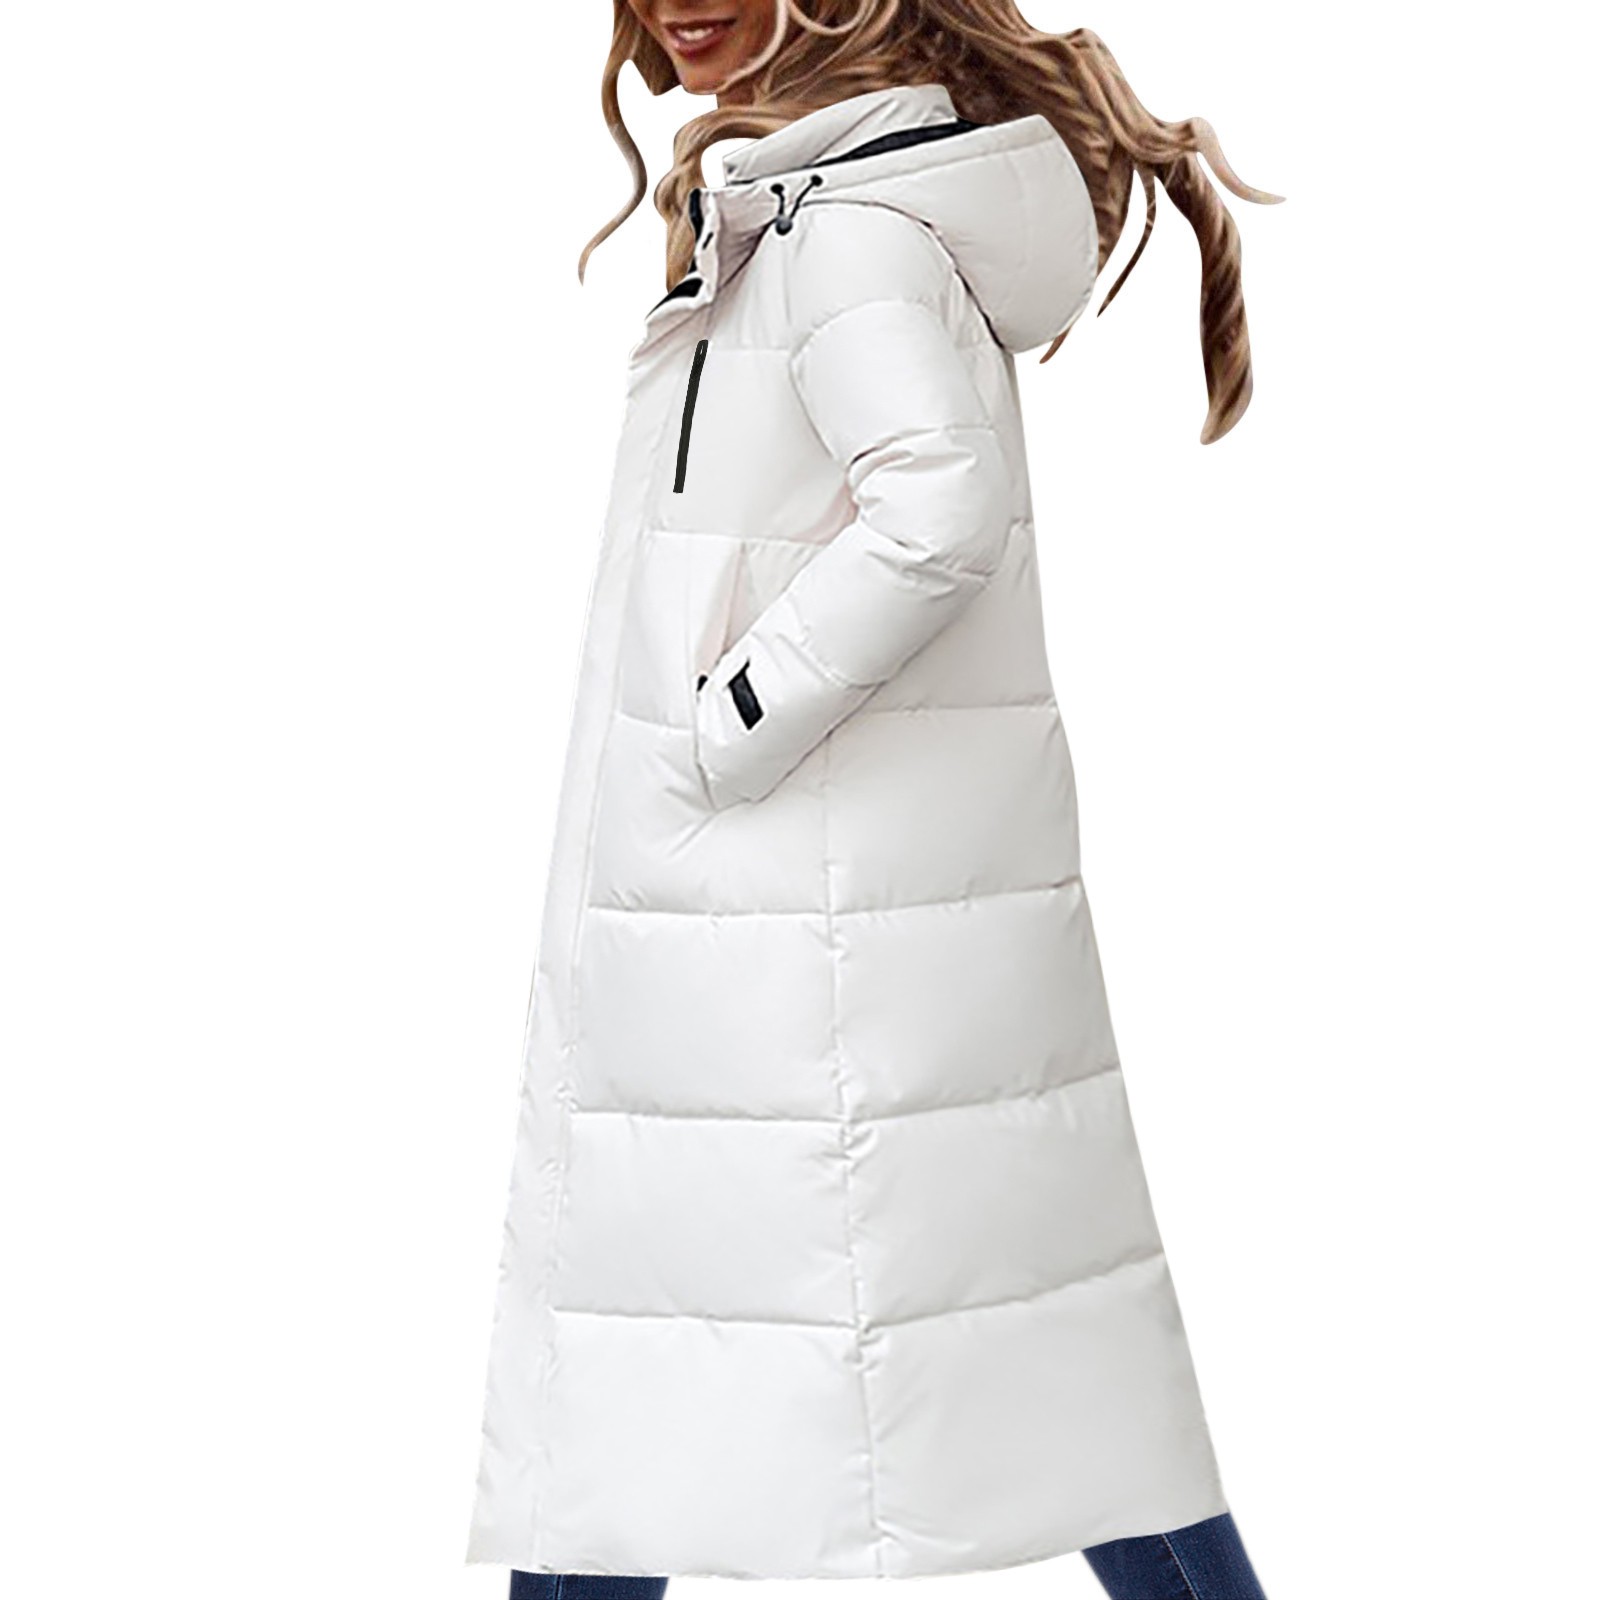 in　Padded　Knee　Winter　Coats　Slim　LBECLEY　Lightweight　Jacket　Size　Large　Women's　Women　Xl　Coat　Cotton　Lightweight　Winter　Large　White　Thickened　Over　Collar　Jacket　Long　Warmest　for　Clothes